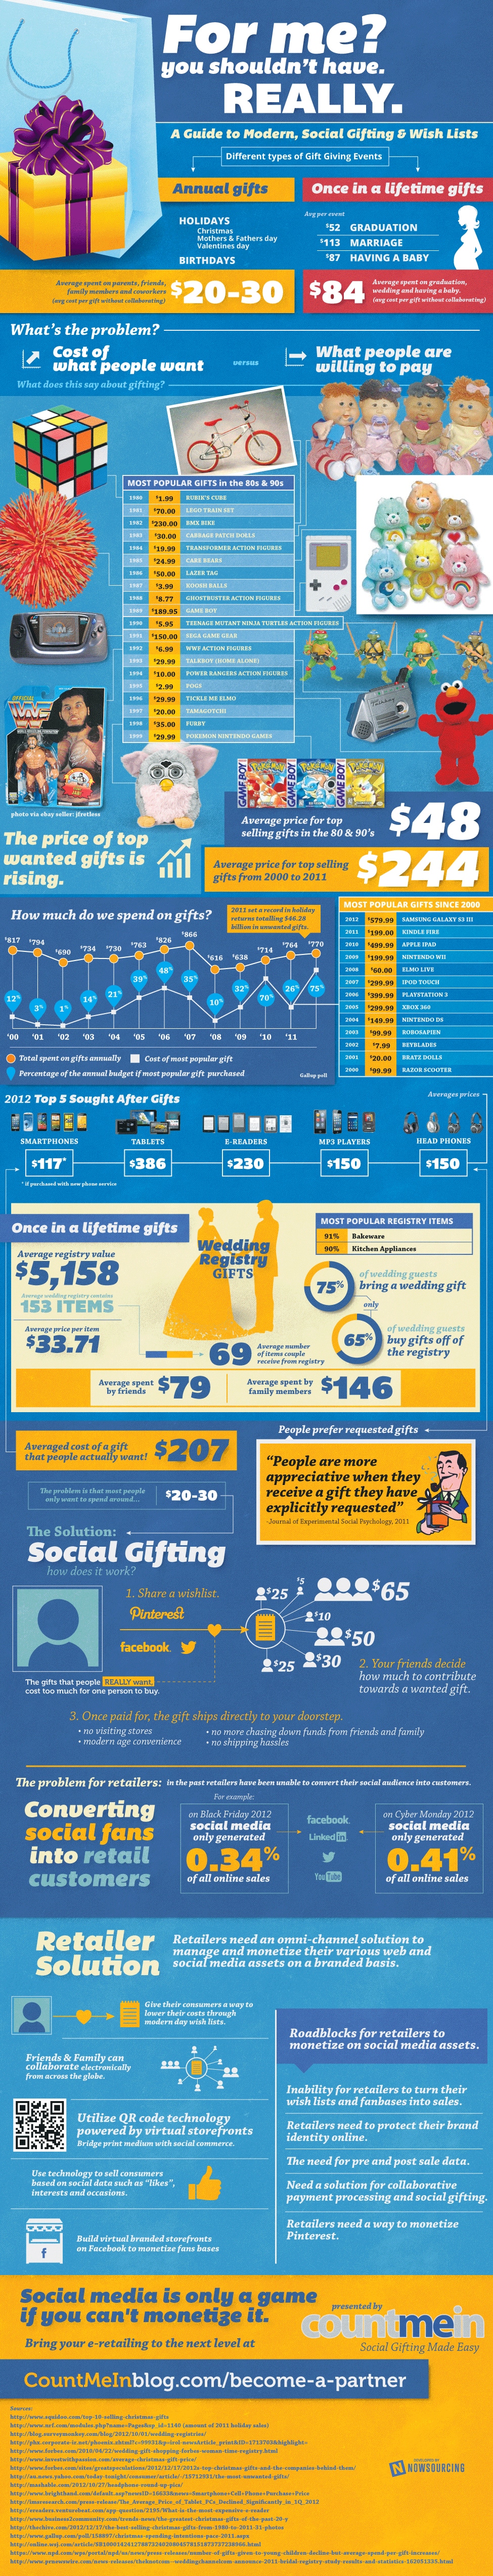 Social Gifting: The Reasons Why This Is The Buzzword [Infographic]